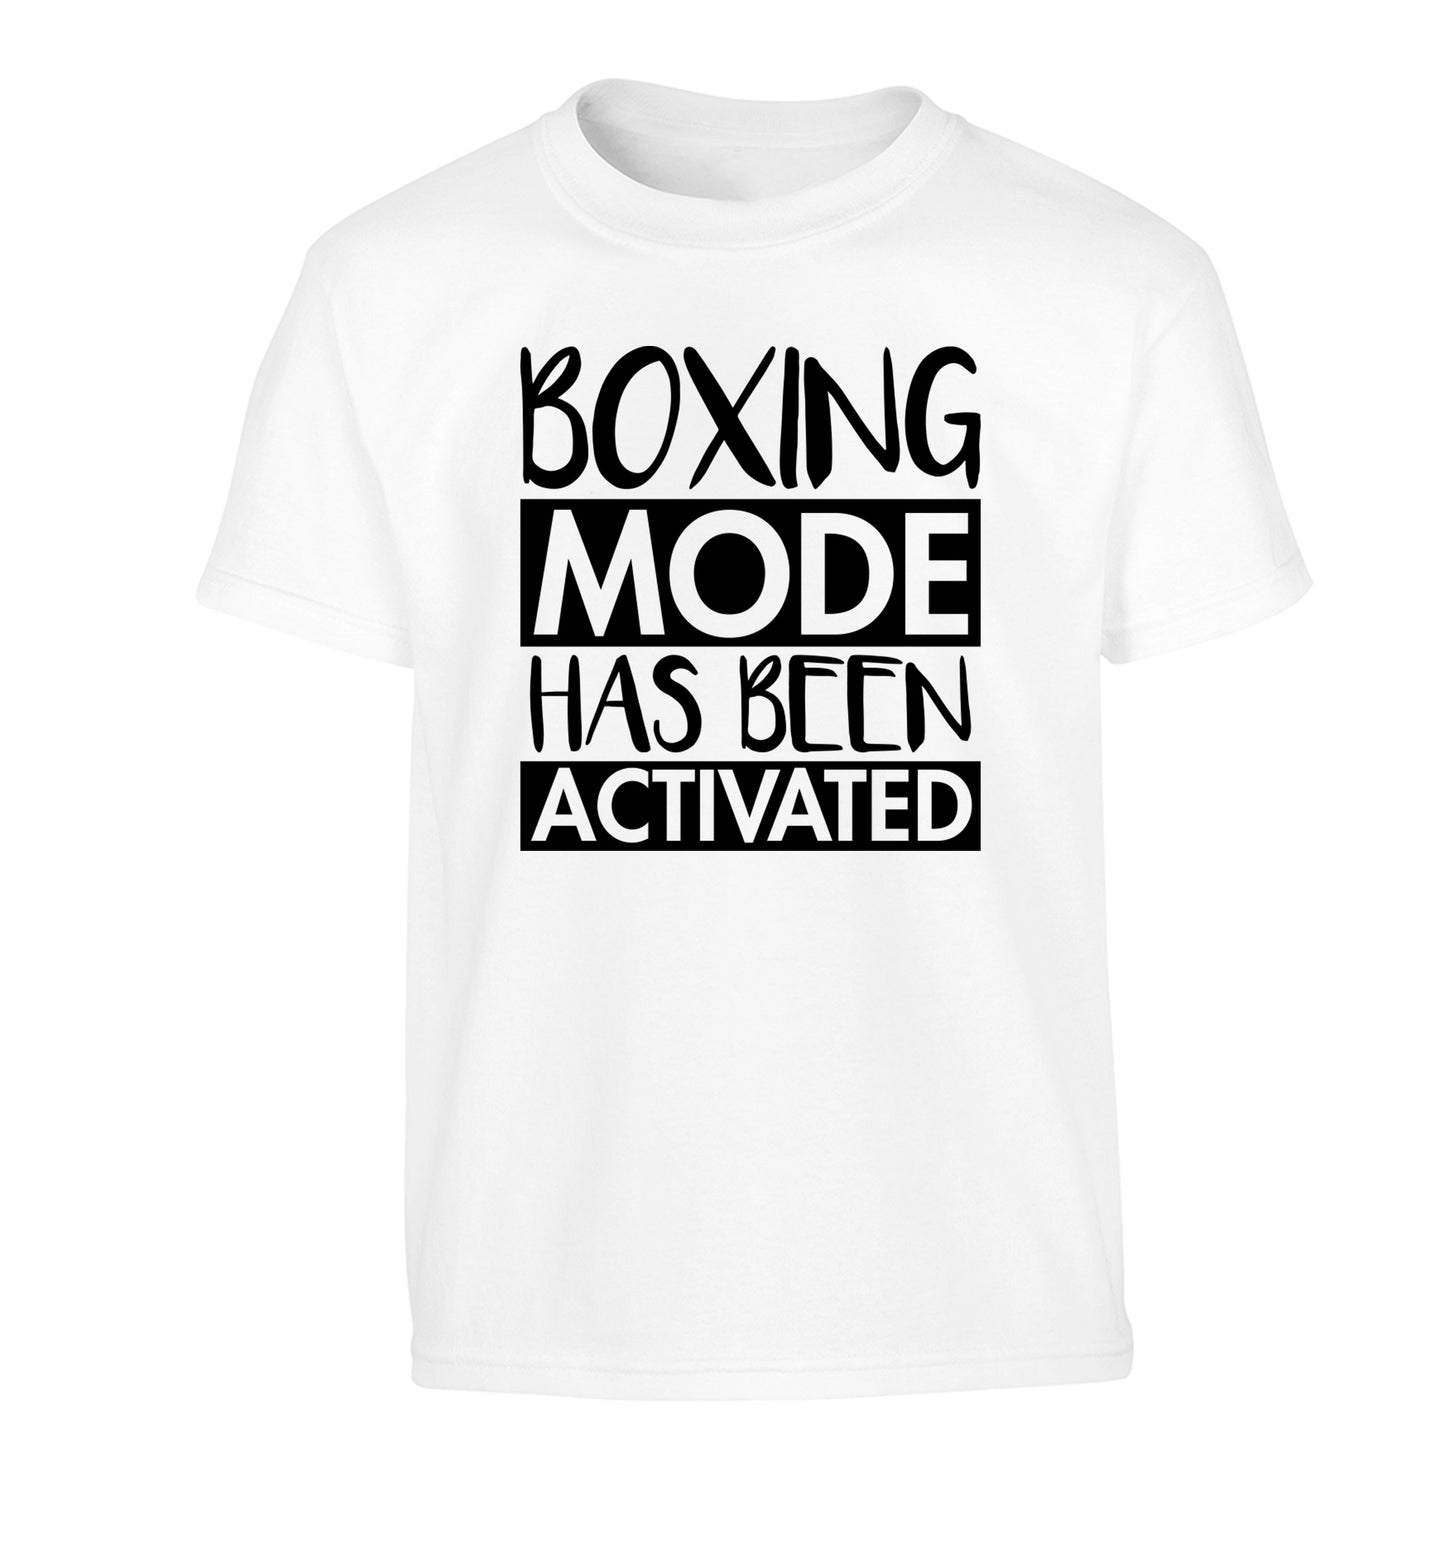 Boxing mode activated Children's white Tshirt 12-14 Years